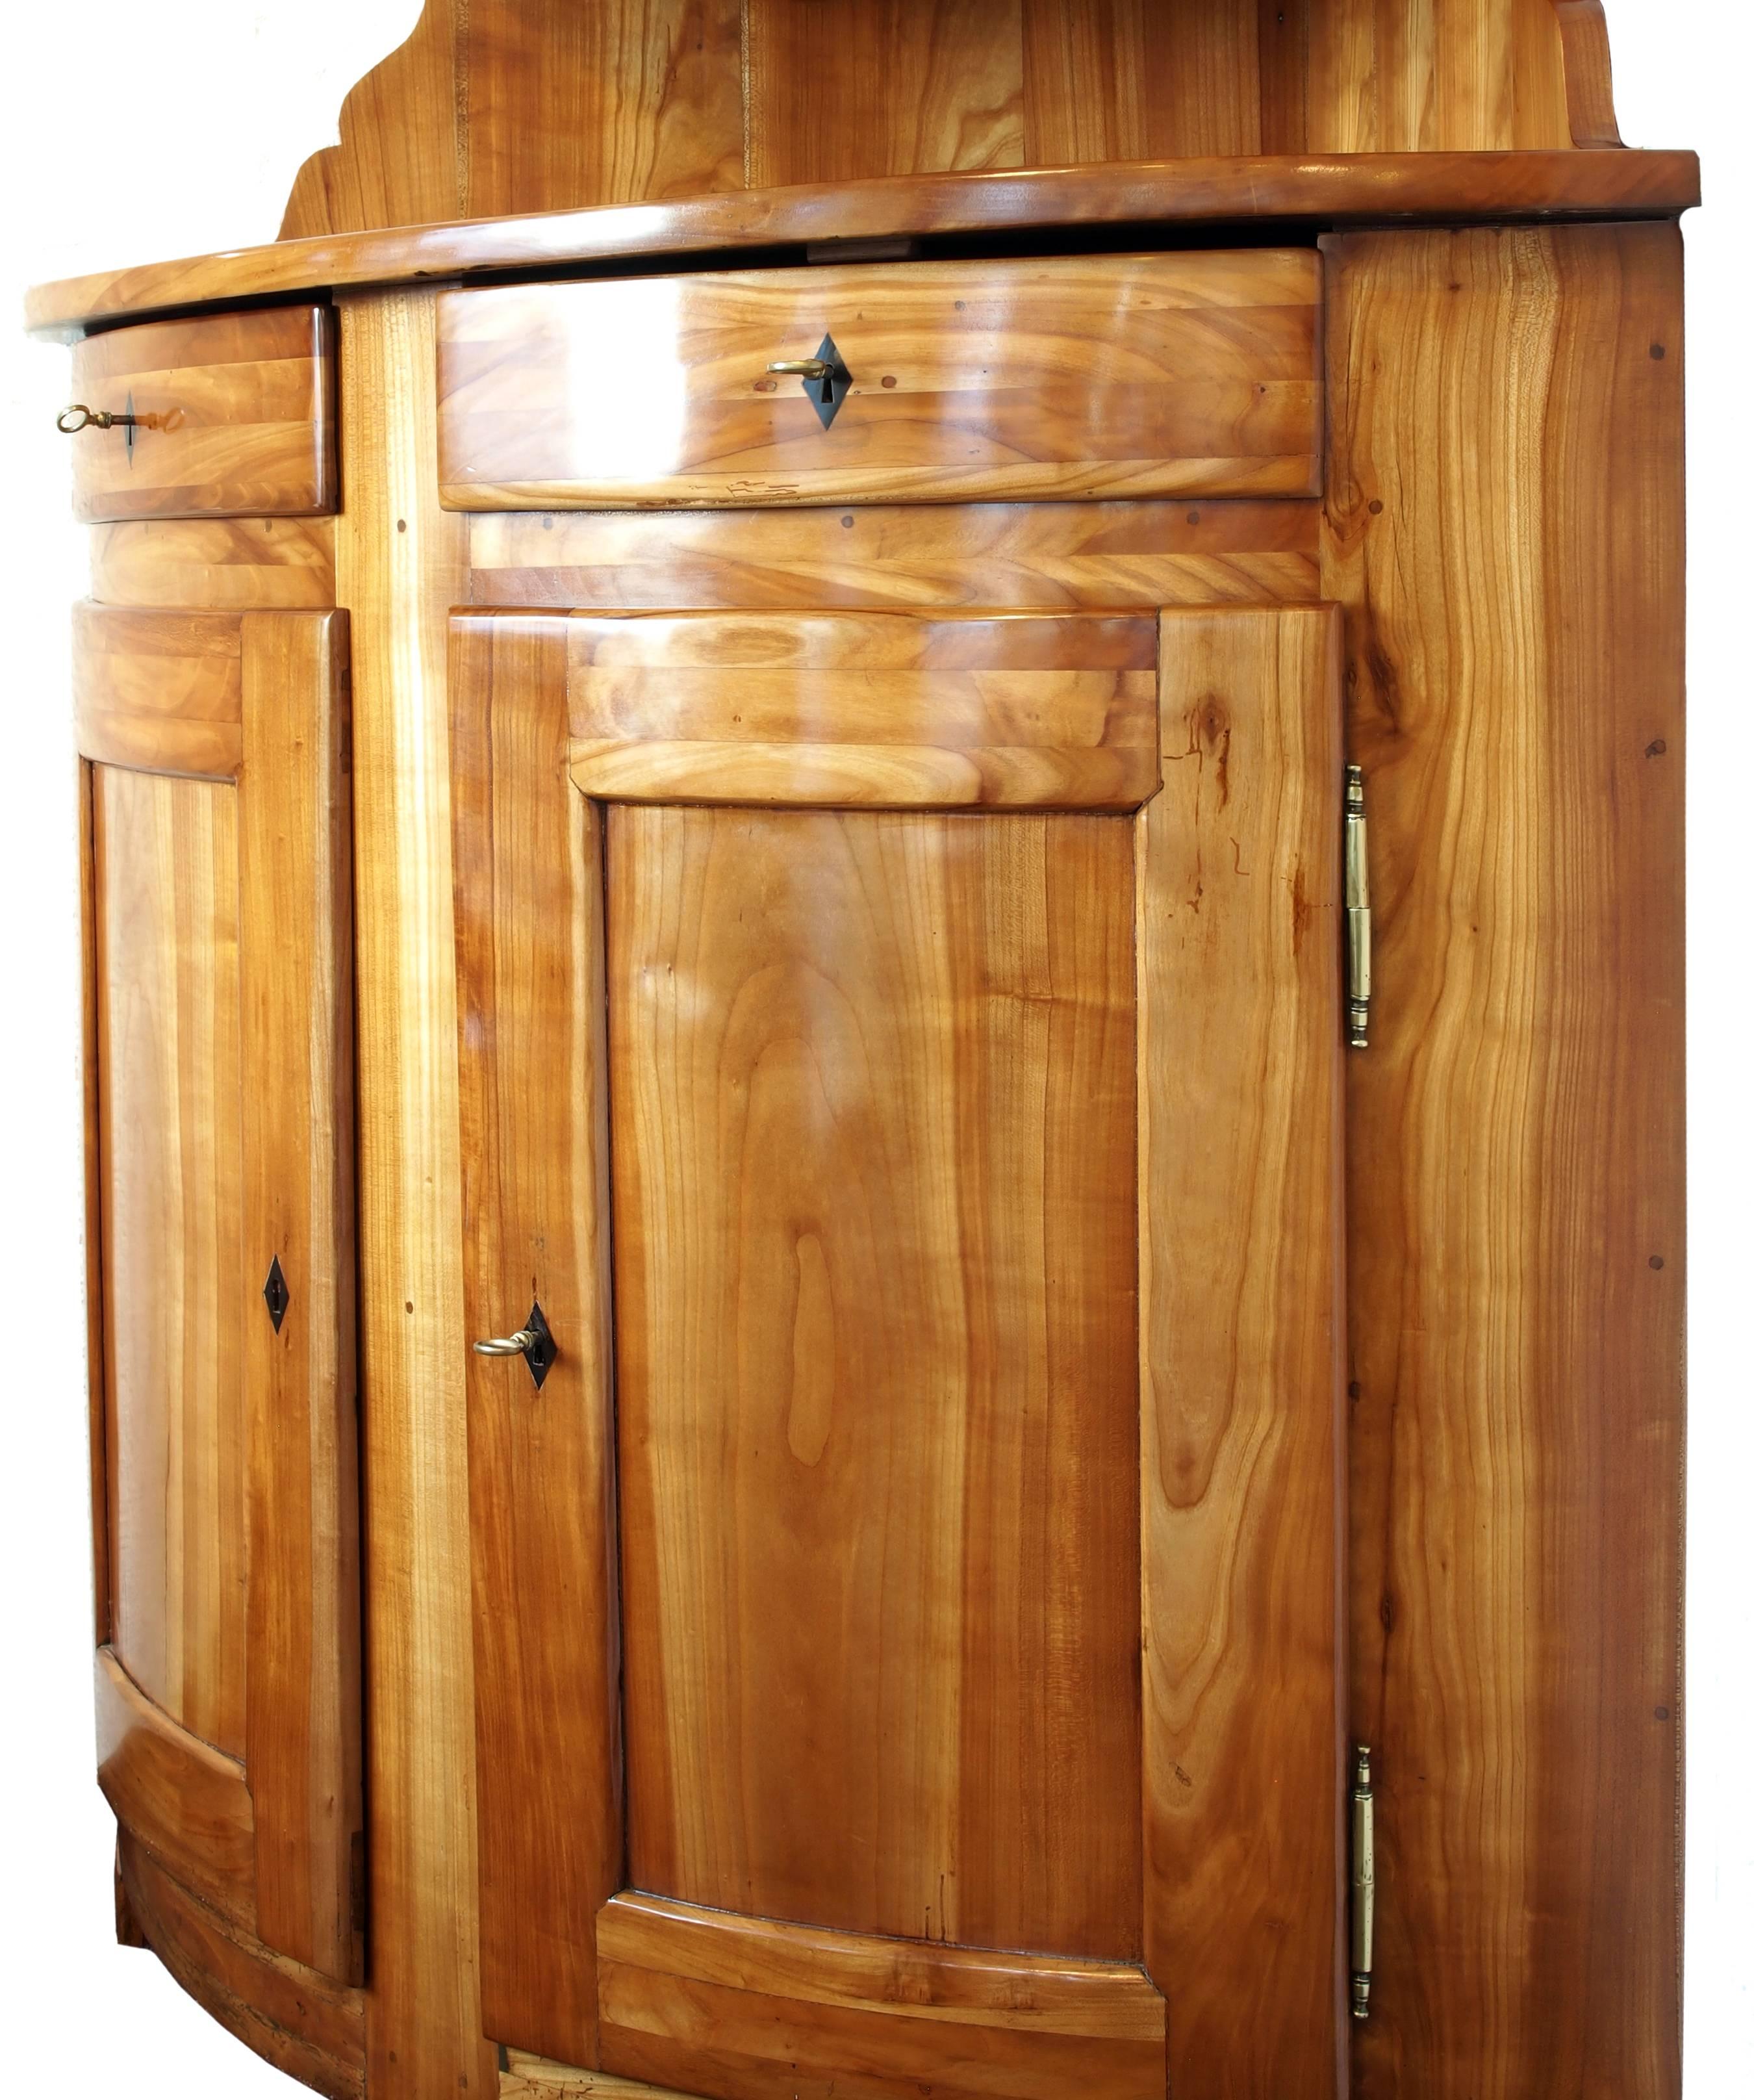 Polished Early 19th Century Solid Cherry Biedermeier Corner Cabinet For Sale